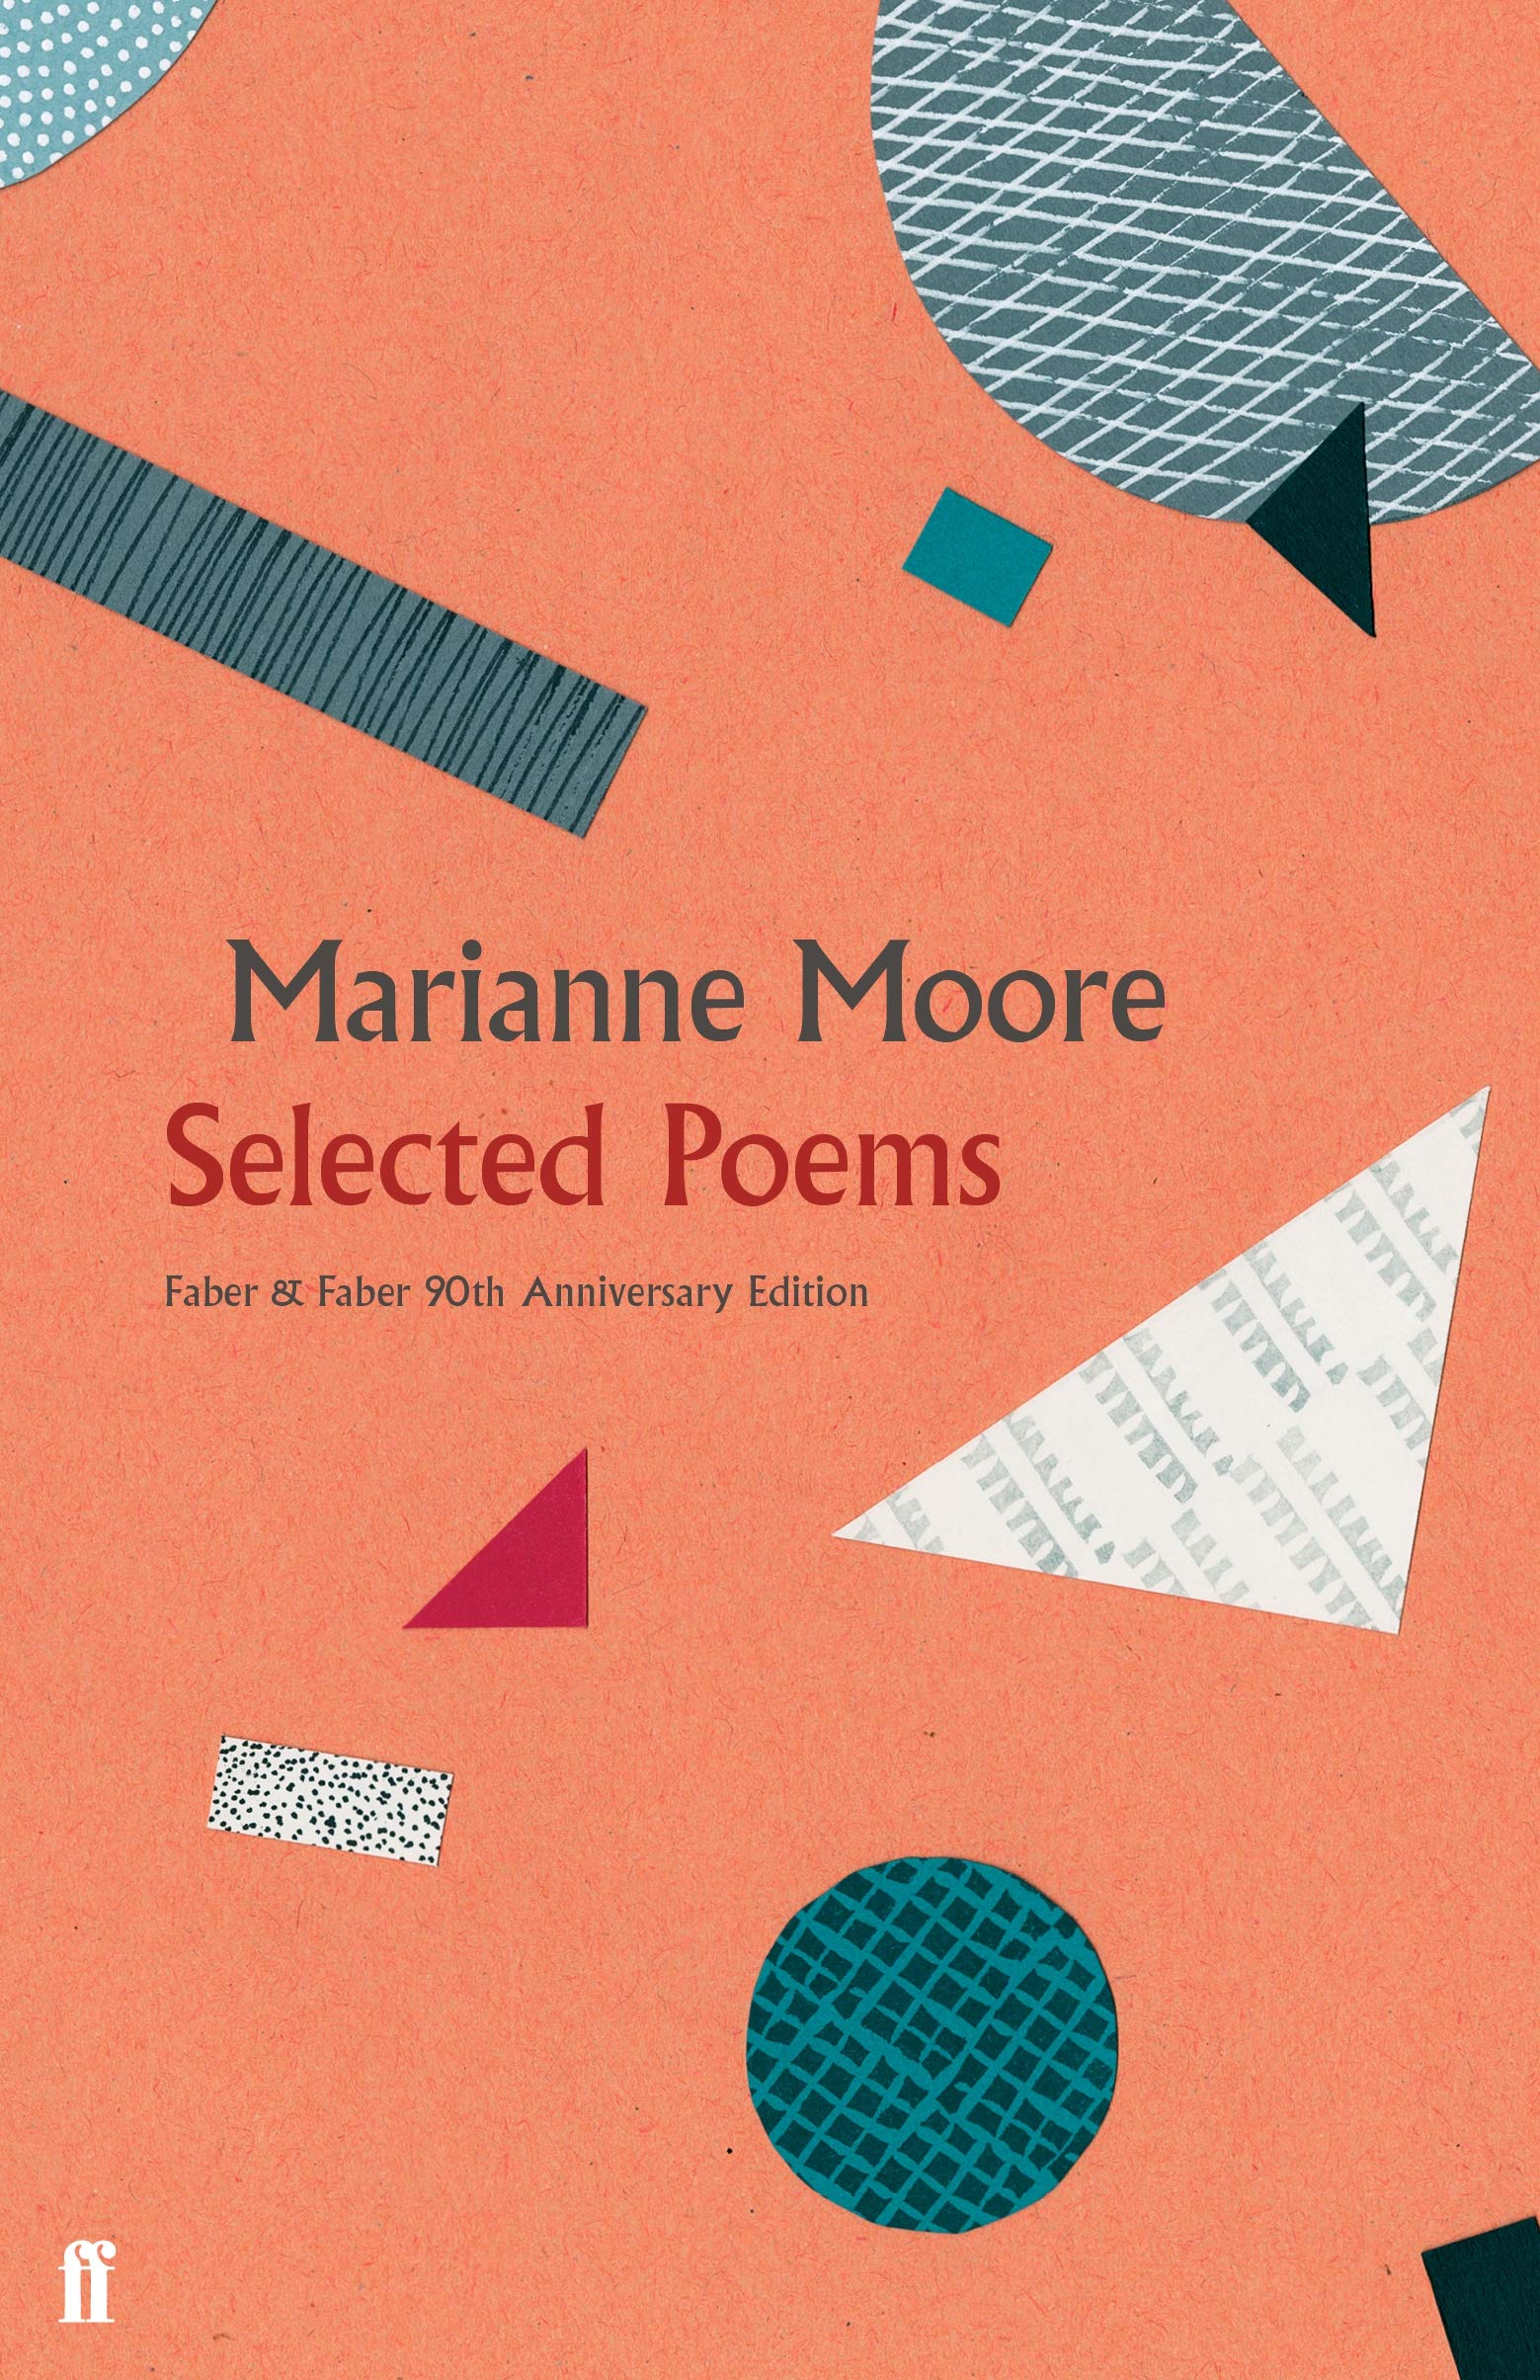 Selected Poems | Marianne Moore